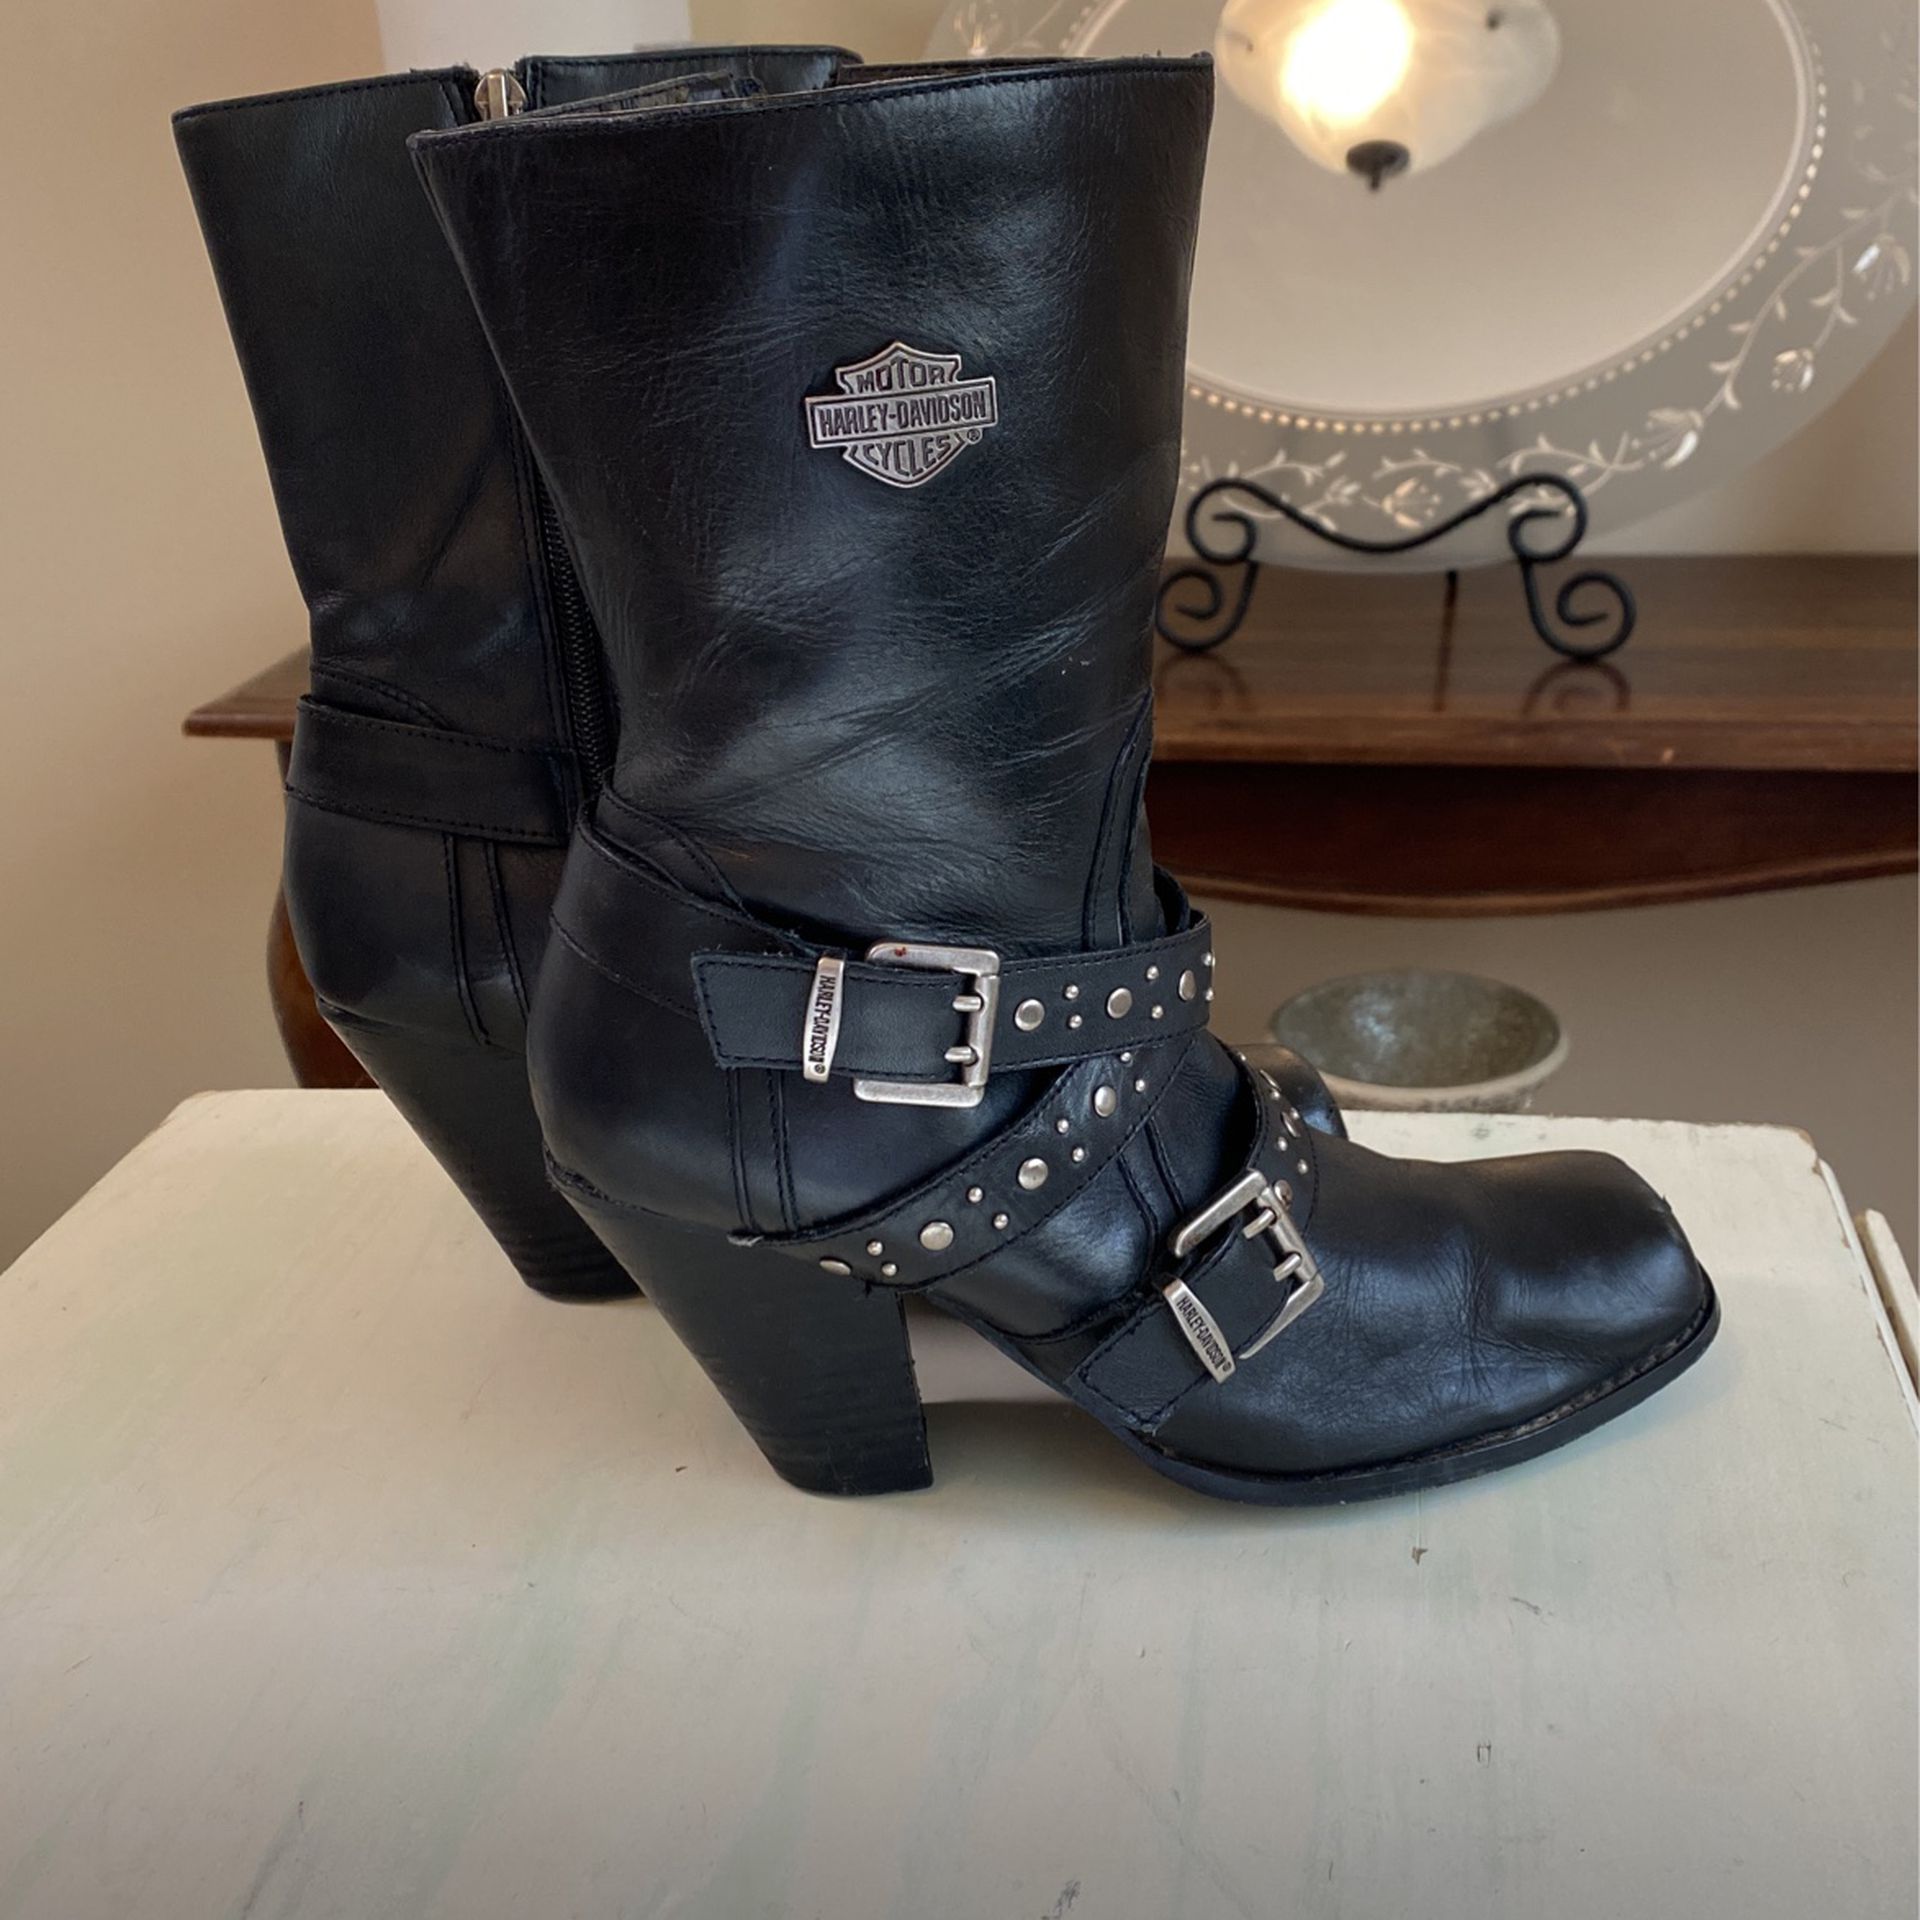 Harley Davidson High Heeled Over Th Ankle Boots 